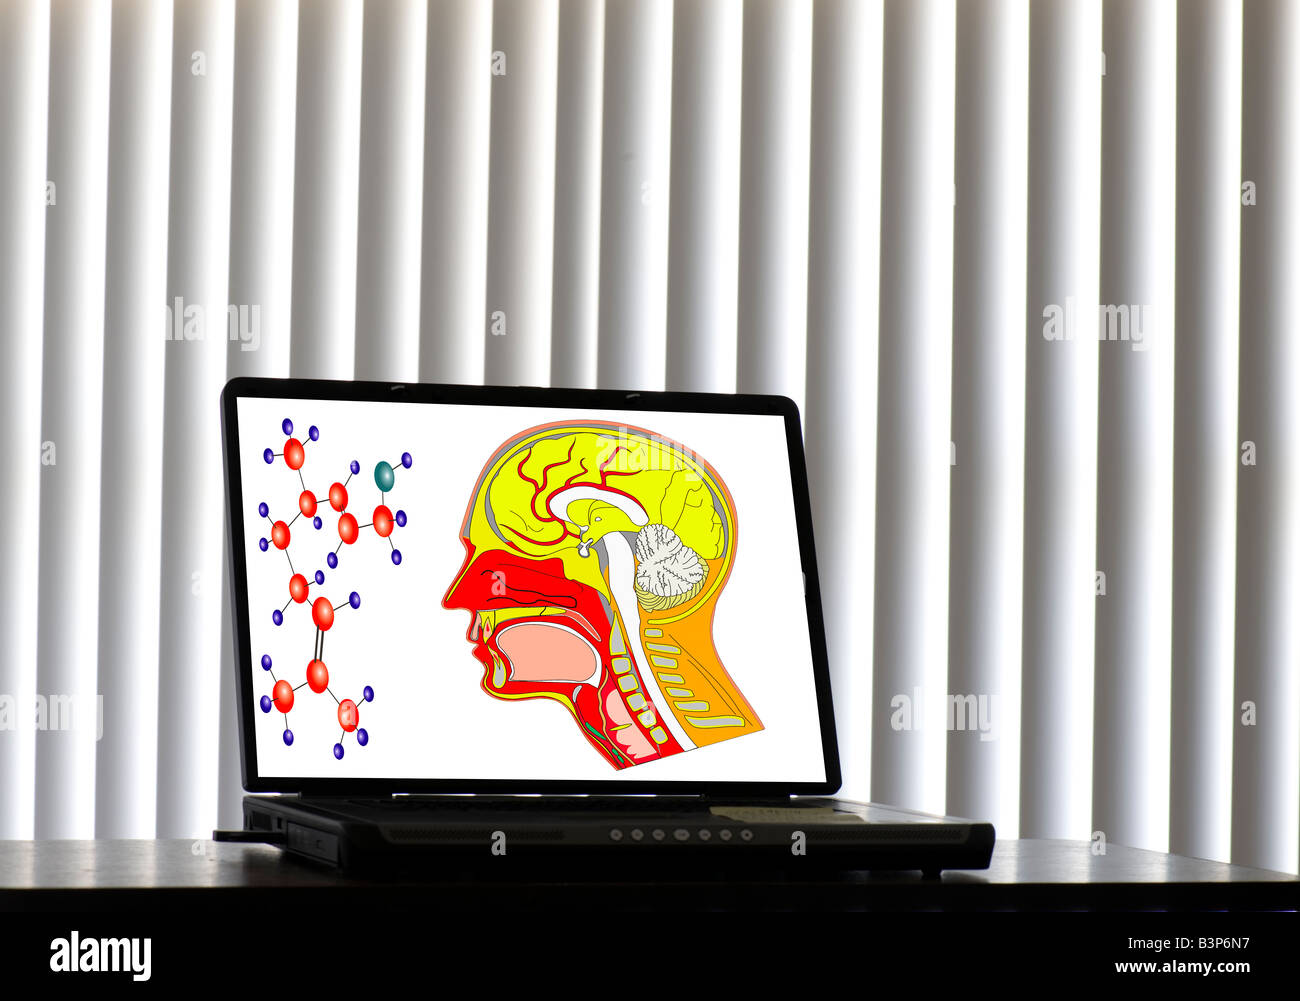 computer generated image of human head and scientific symbols on laptop screen Stock Photo